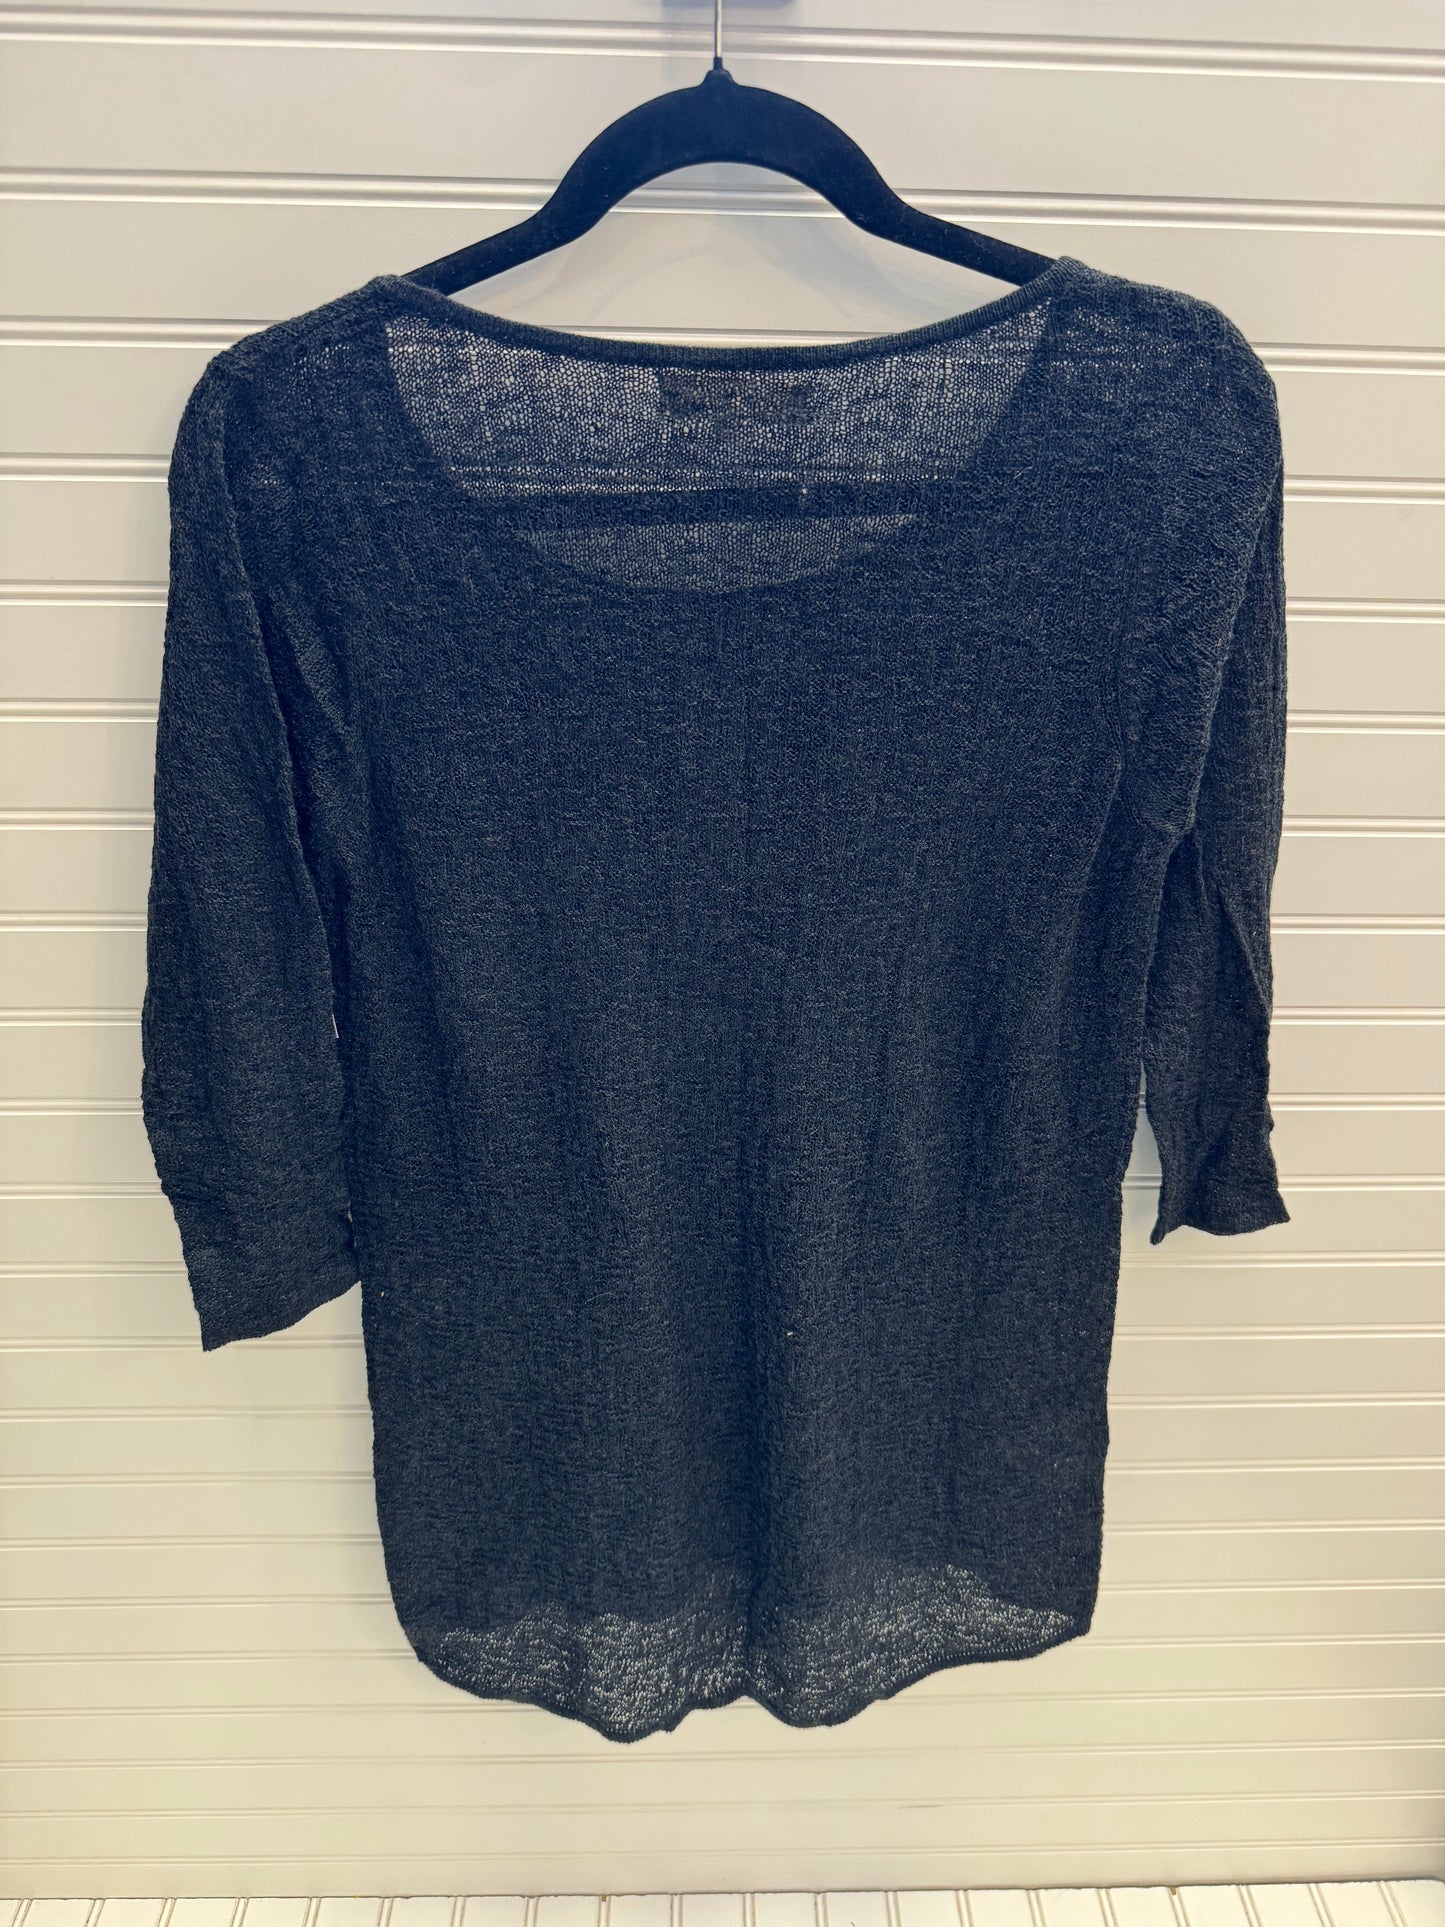 Grey Top 3/4 Sleeve Indigenous, Size S